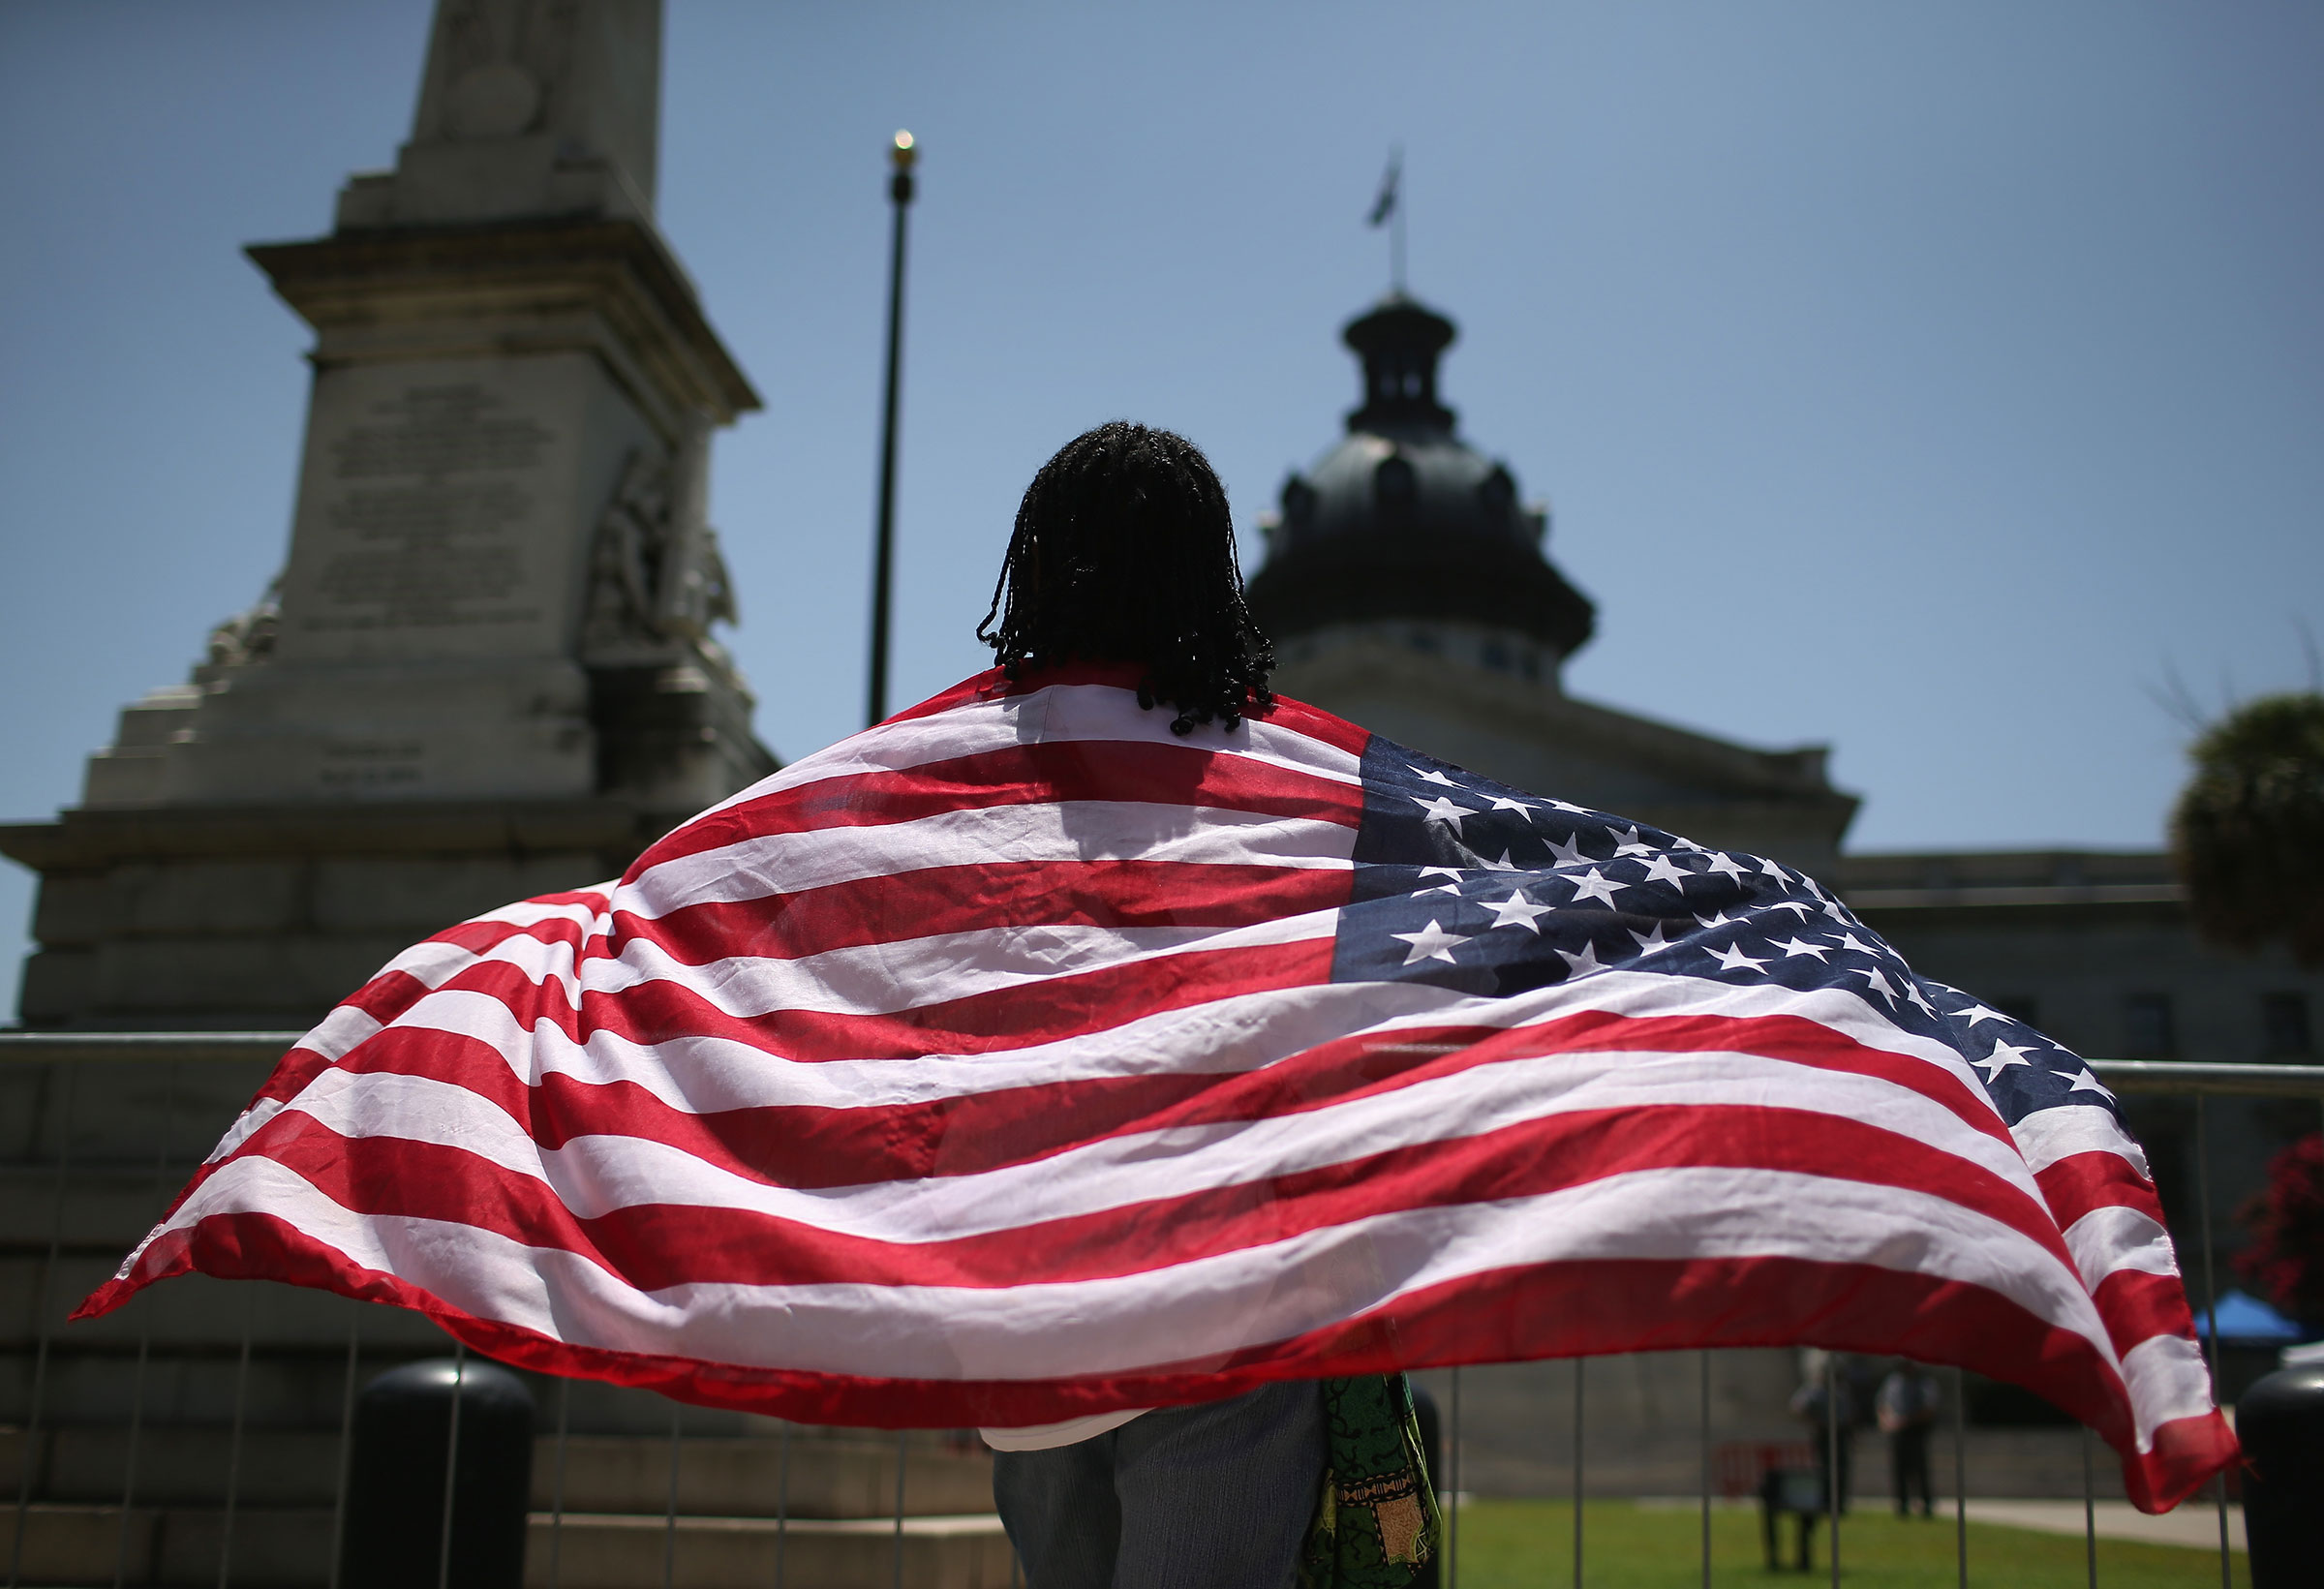 A South Carolinan wears the "Stars and Stripes" after the Confederate "Stars and Bars" was lowered from the flagpole in front of the statehouse on July 10, 2015 in Columbia, South Carolina.